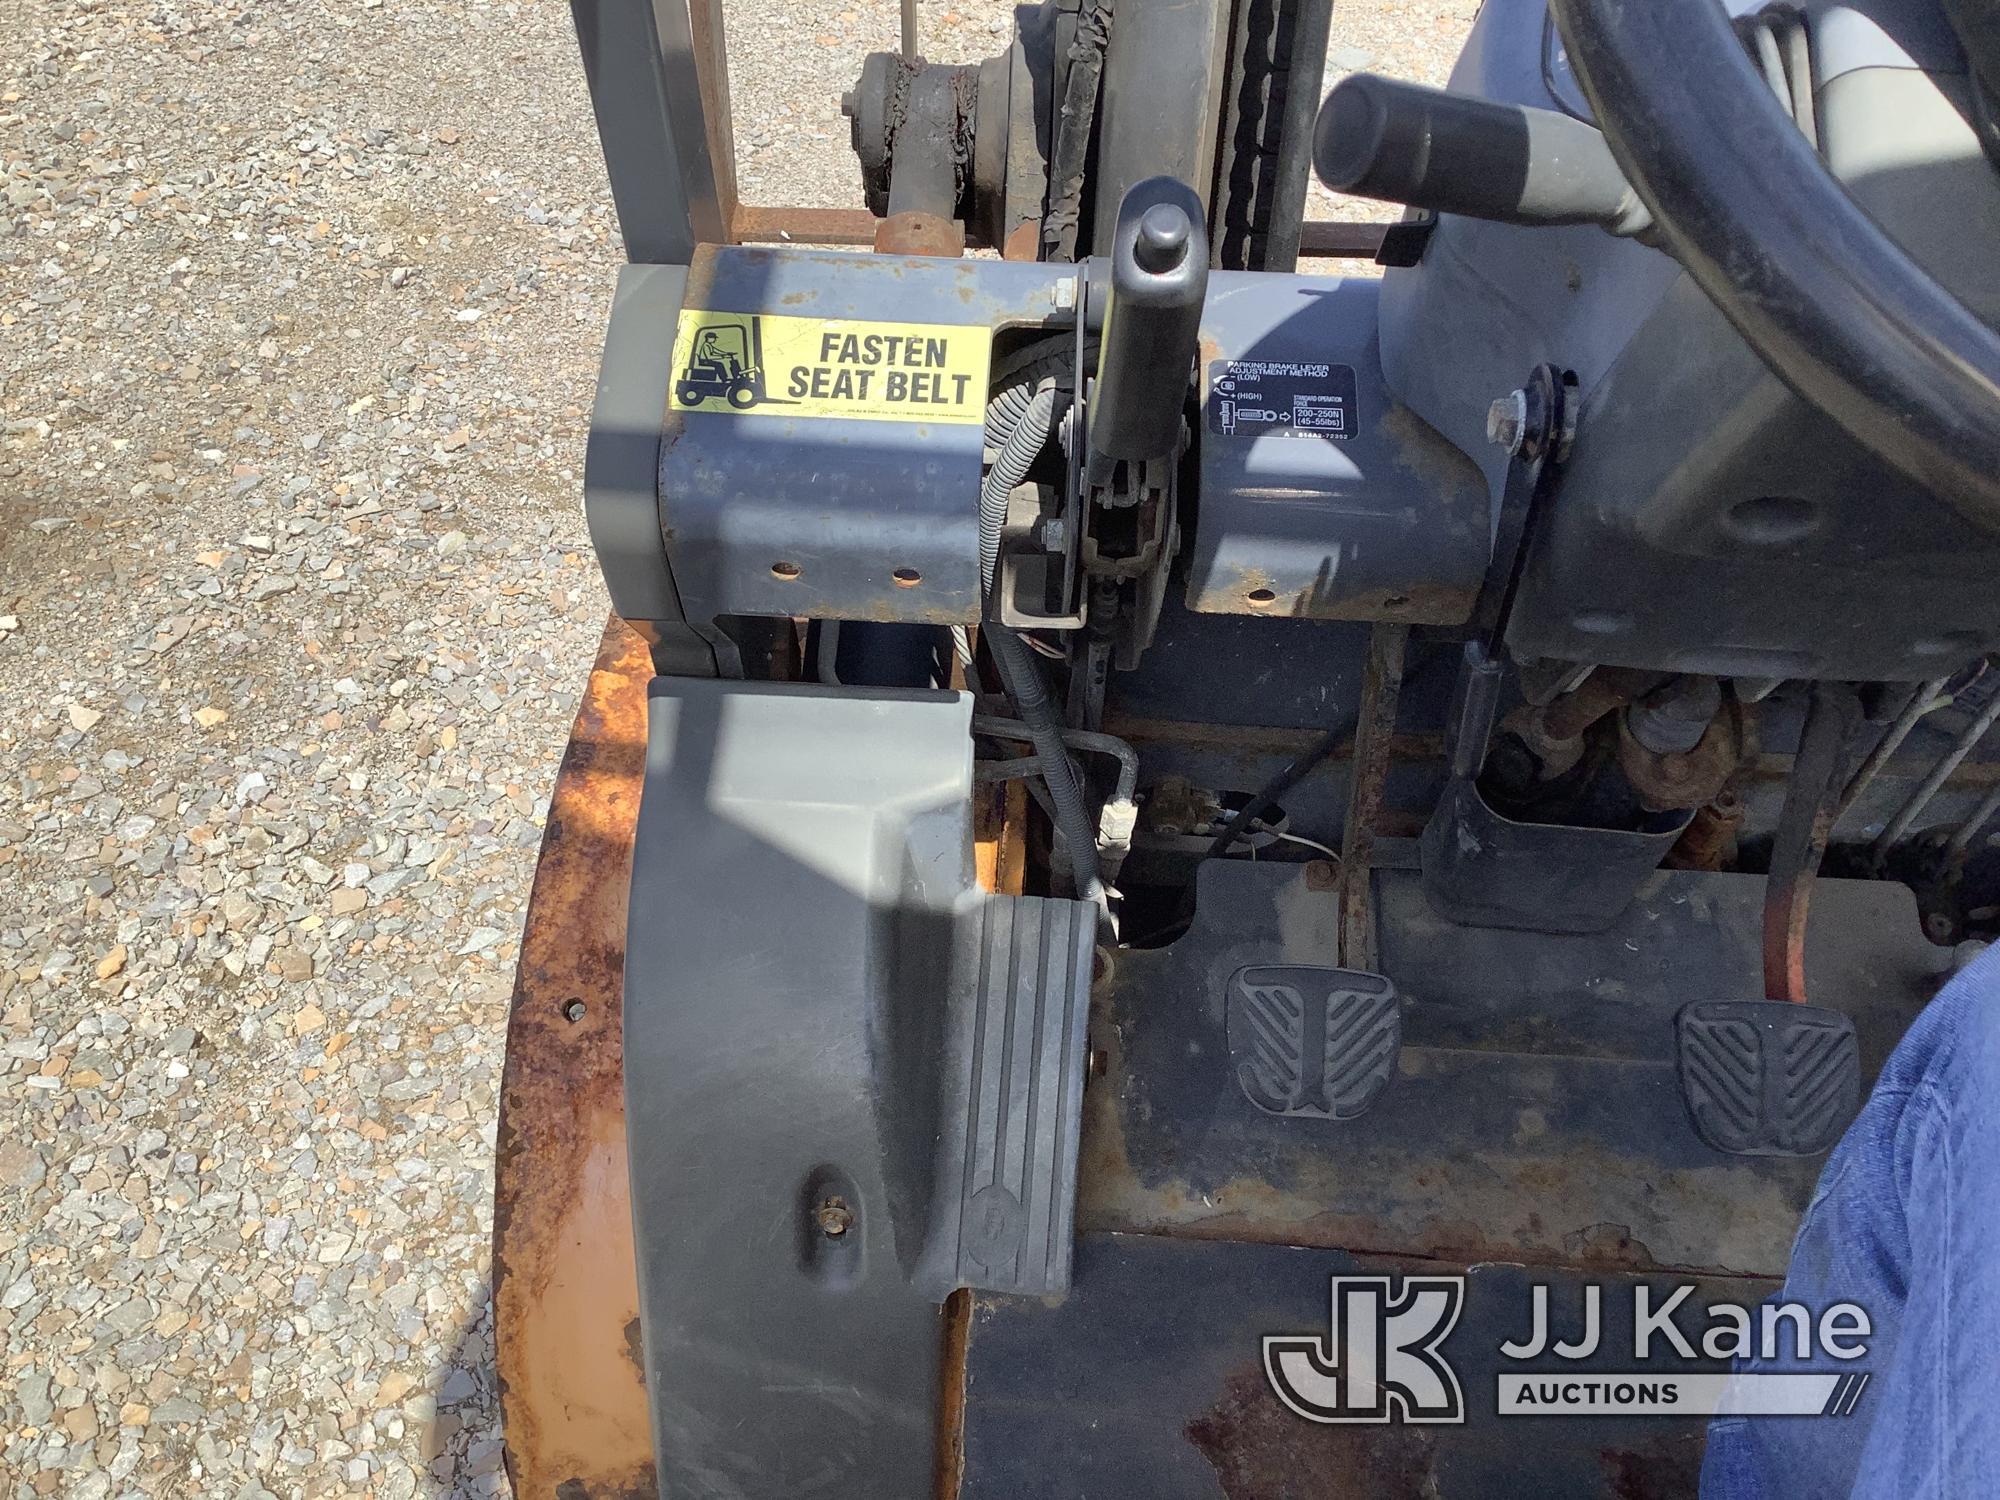 (Smock, PA) TCM FG30T7L Forklift Not Running, Condition Unknown